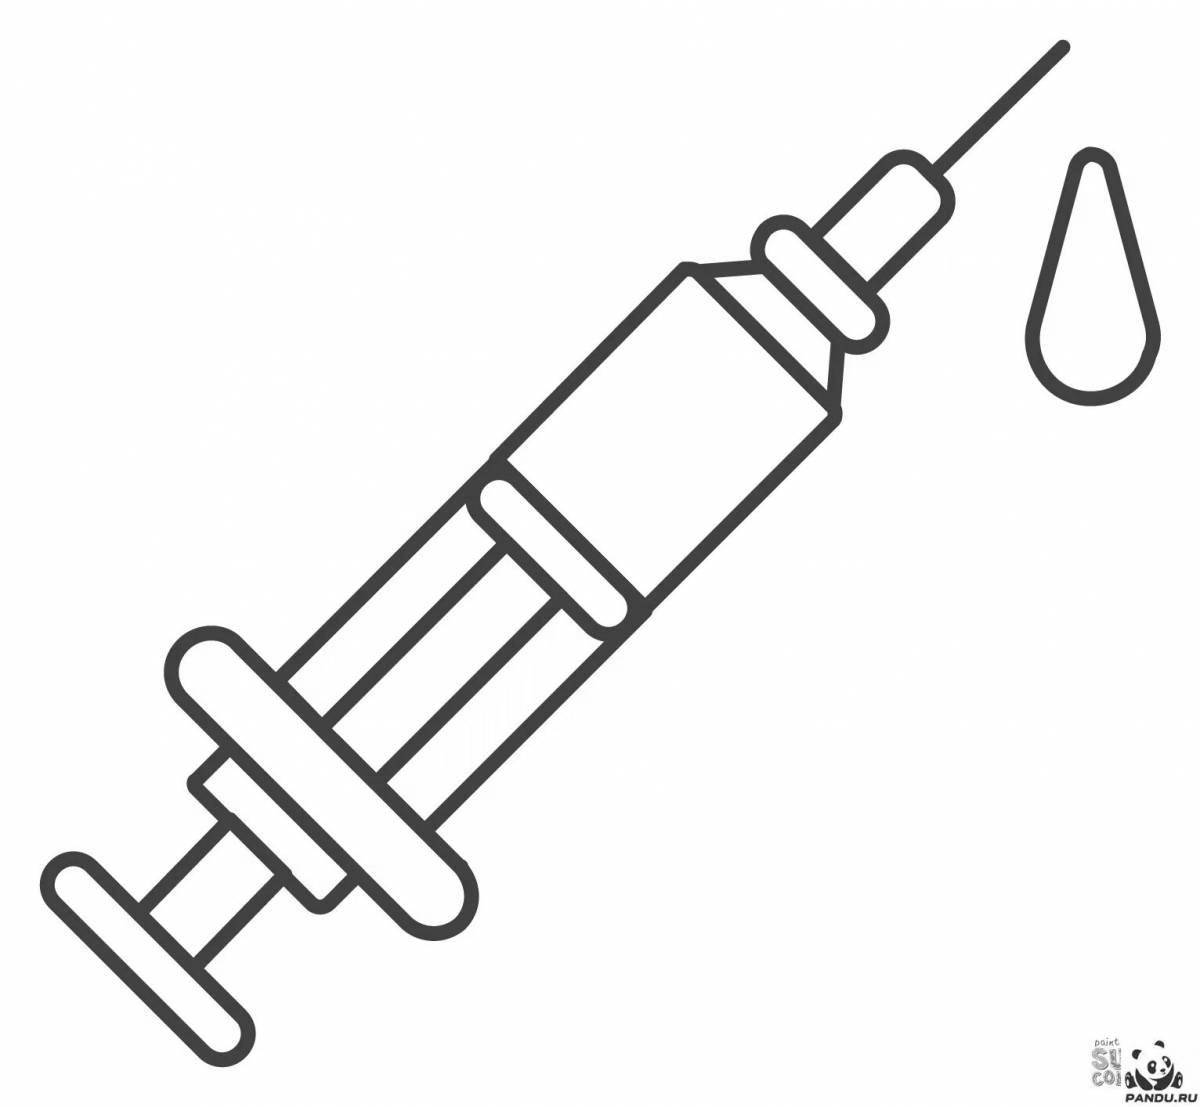 Colorful syringe coloring page for kids